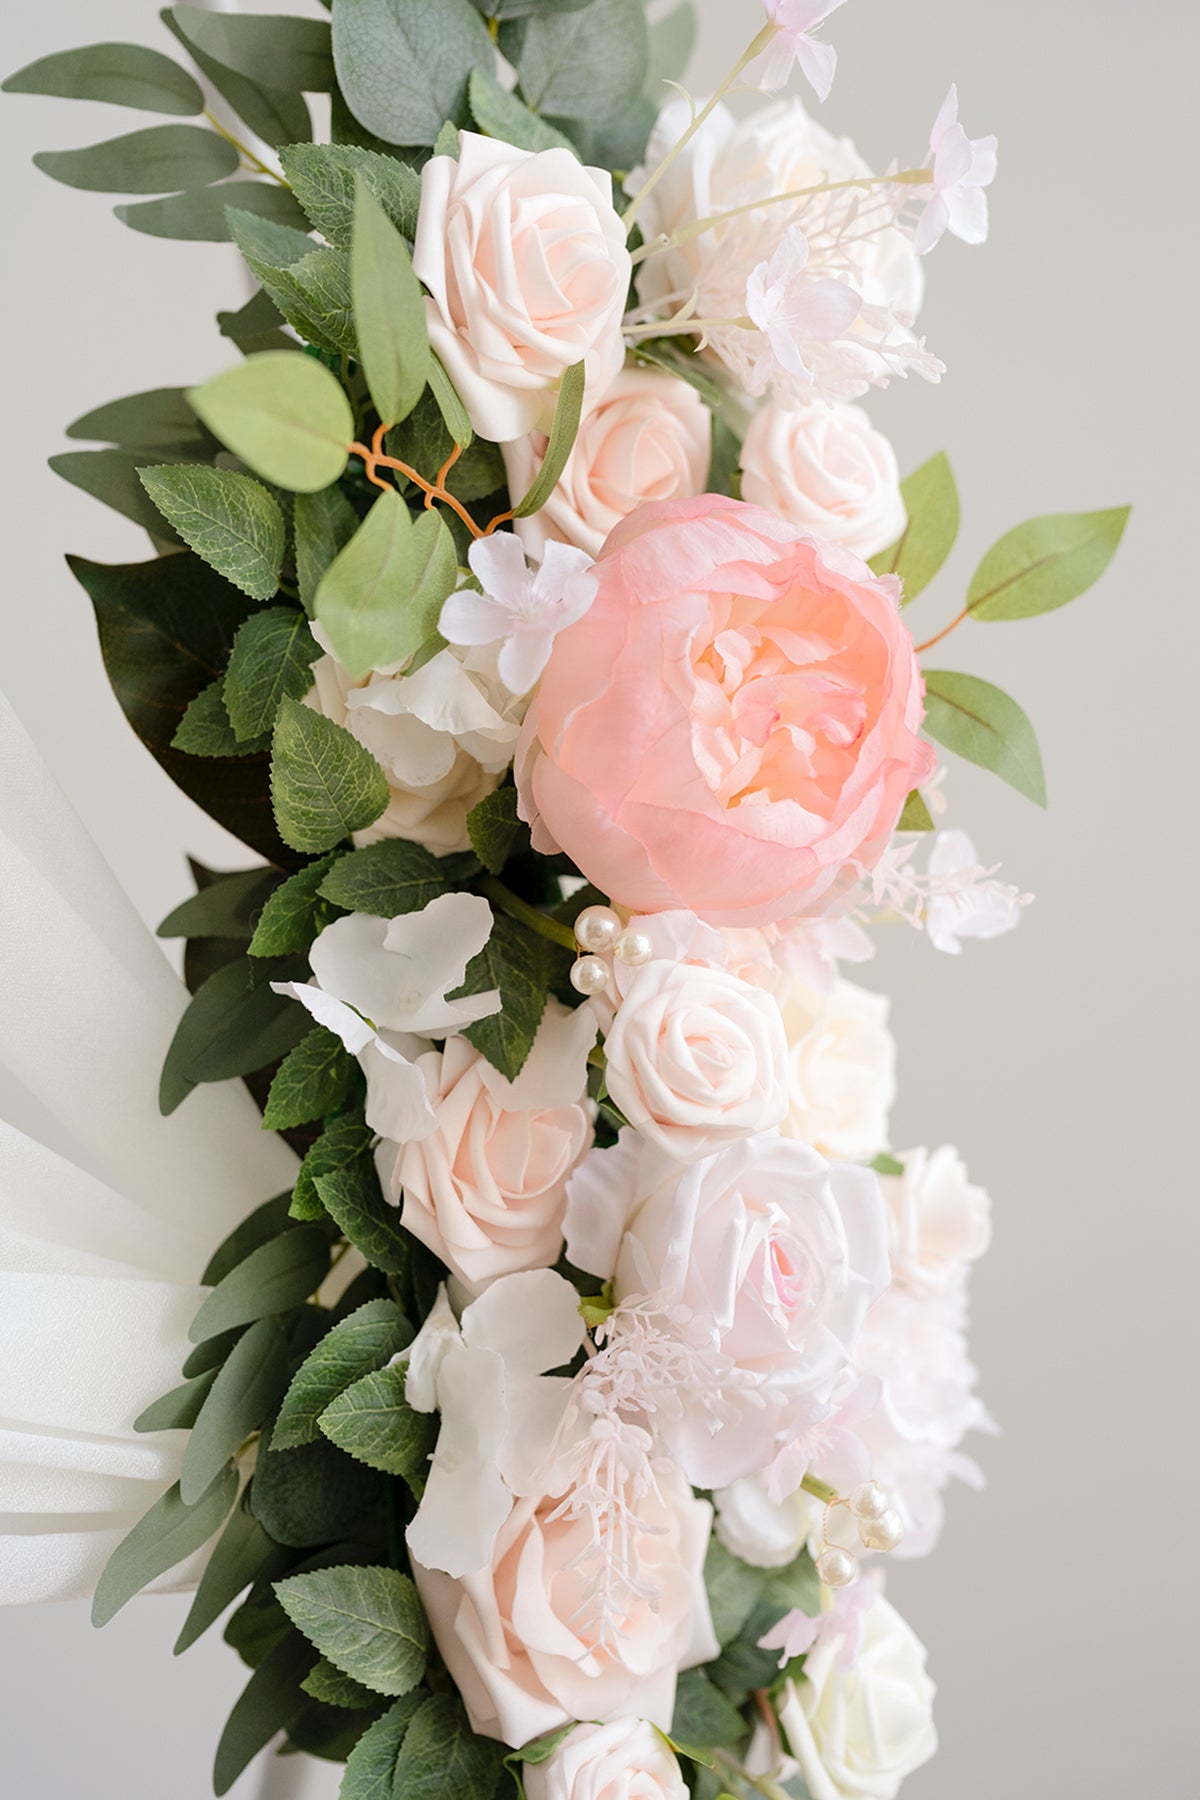 Flower Arrangements for Arch Decor in Blush & Cream | Clearance